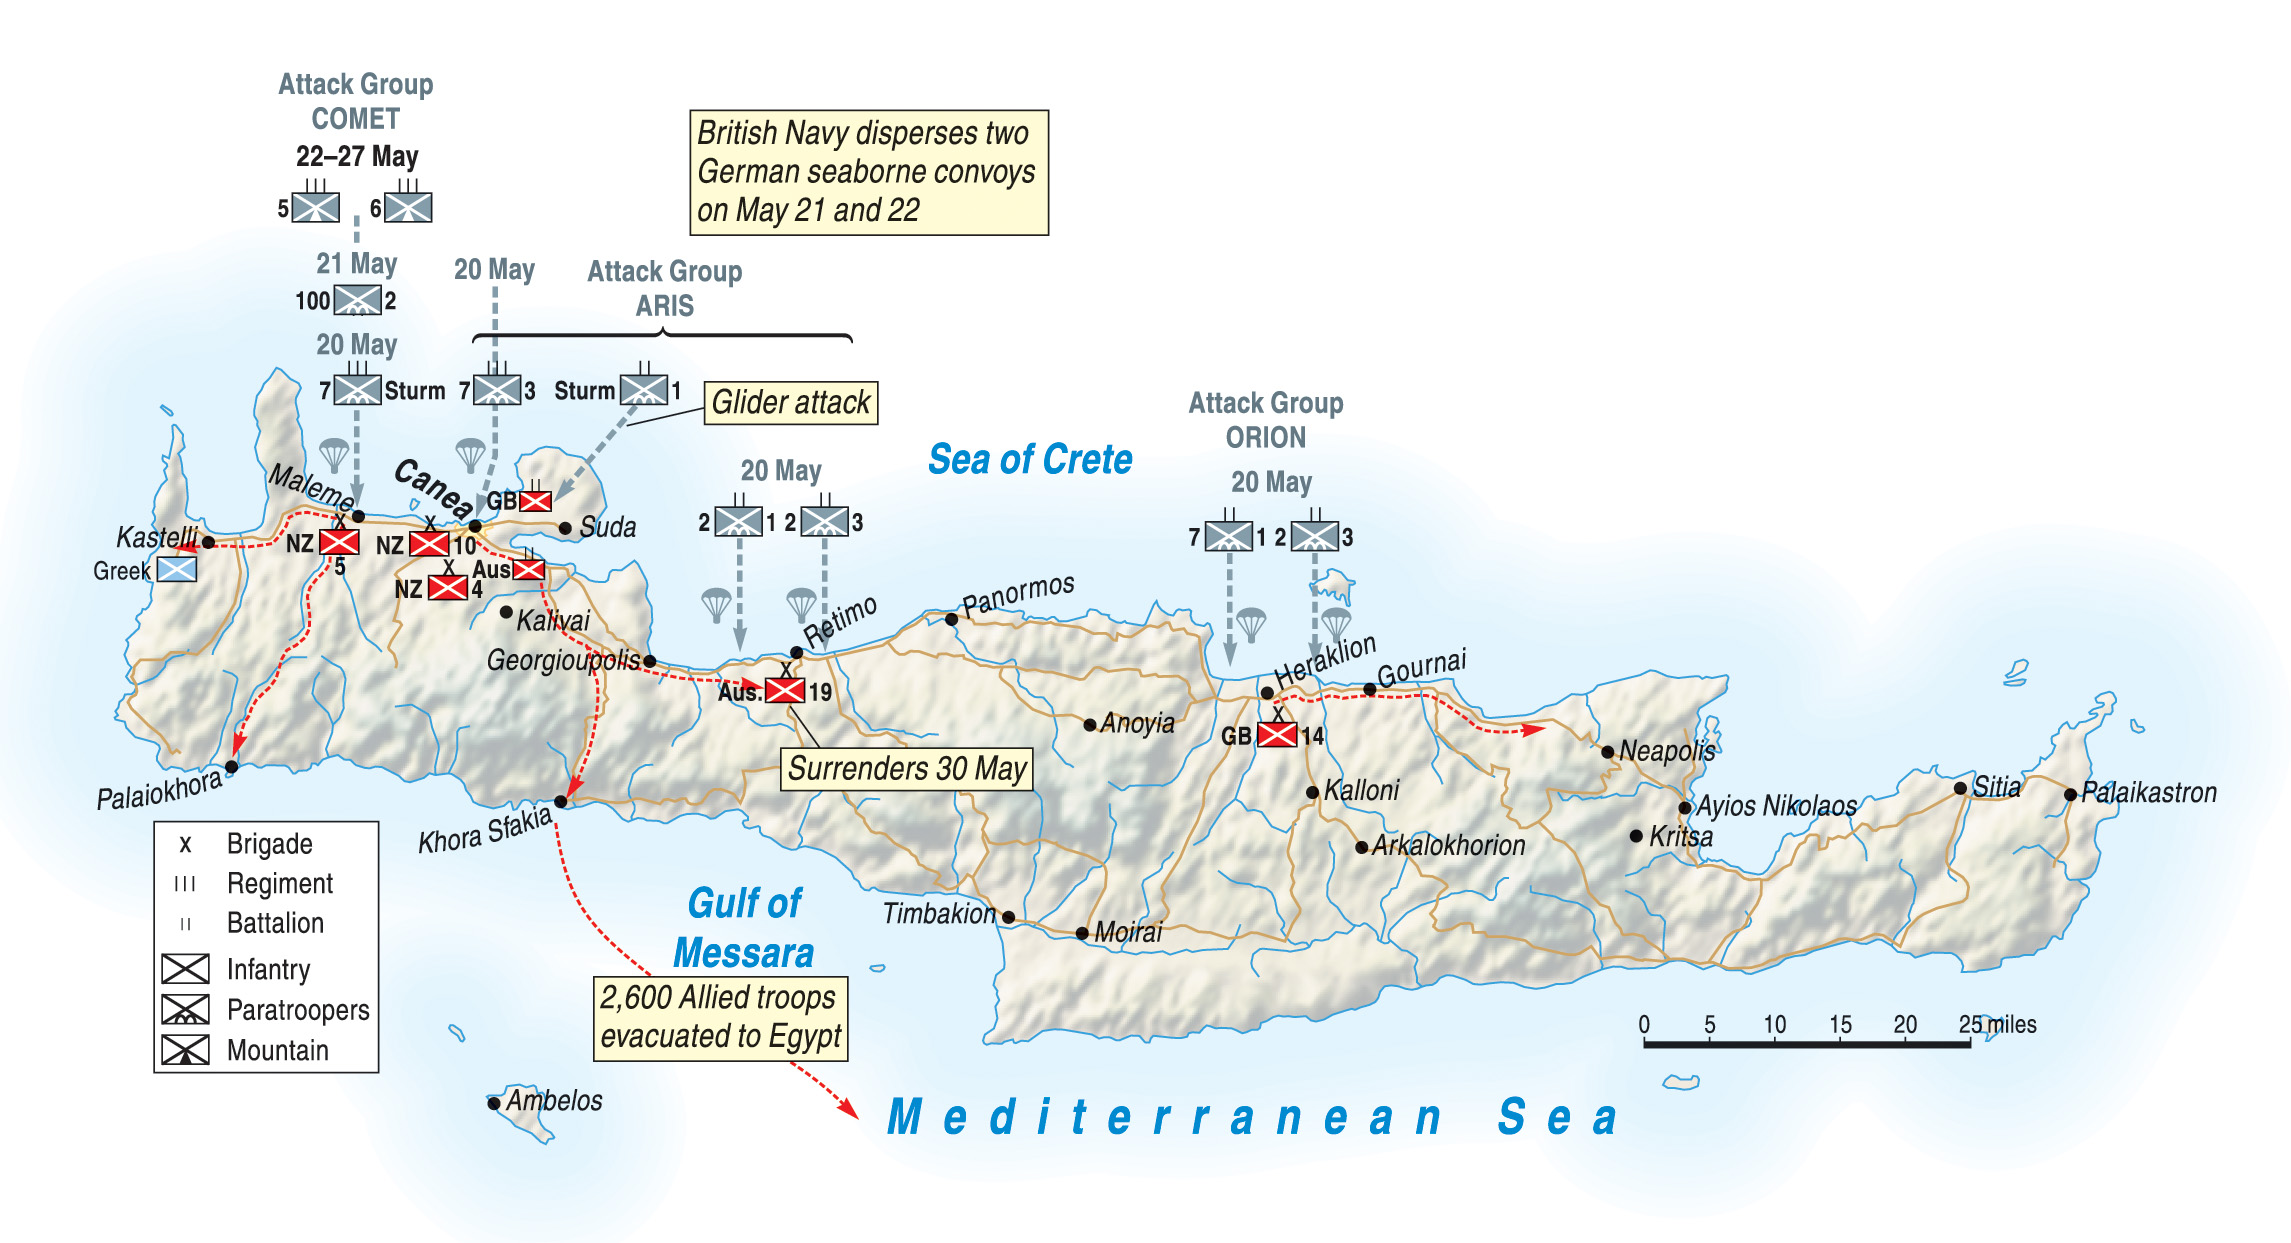 The execution of Operation Mercury called for airborne landings to secure strategically vital airfields on the northern half of Crete. German forces would then link up and converge on Suda Bay, the island’s only defensible harbor.